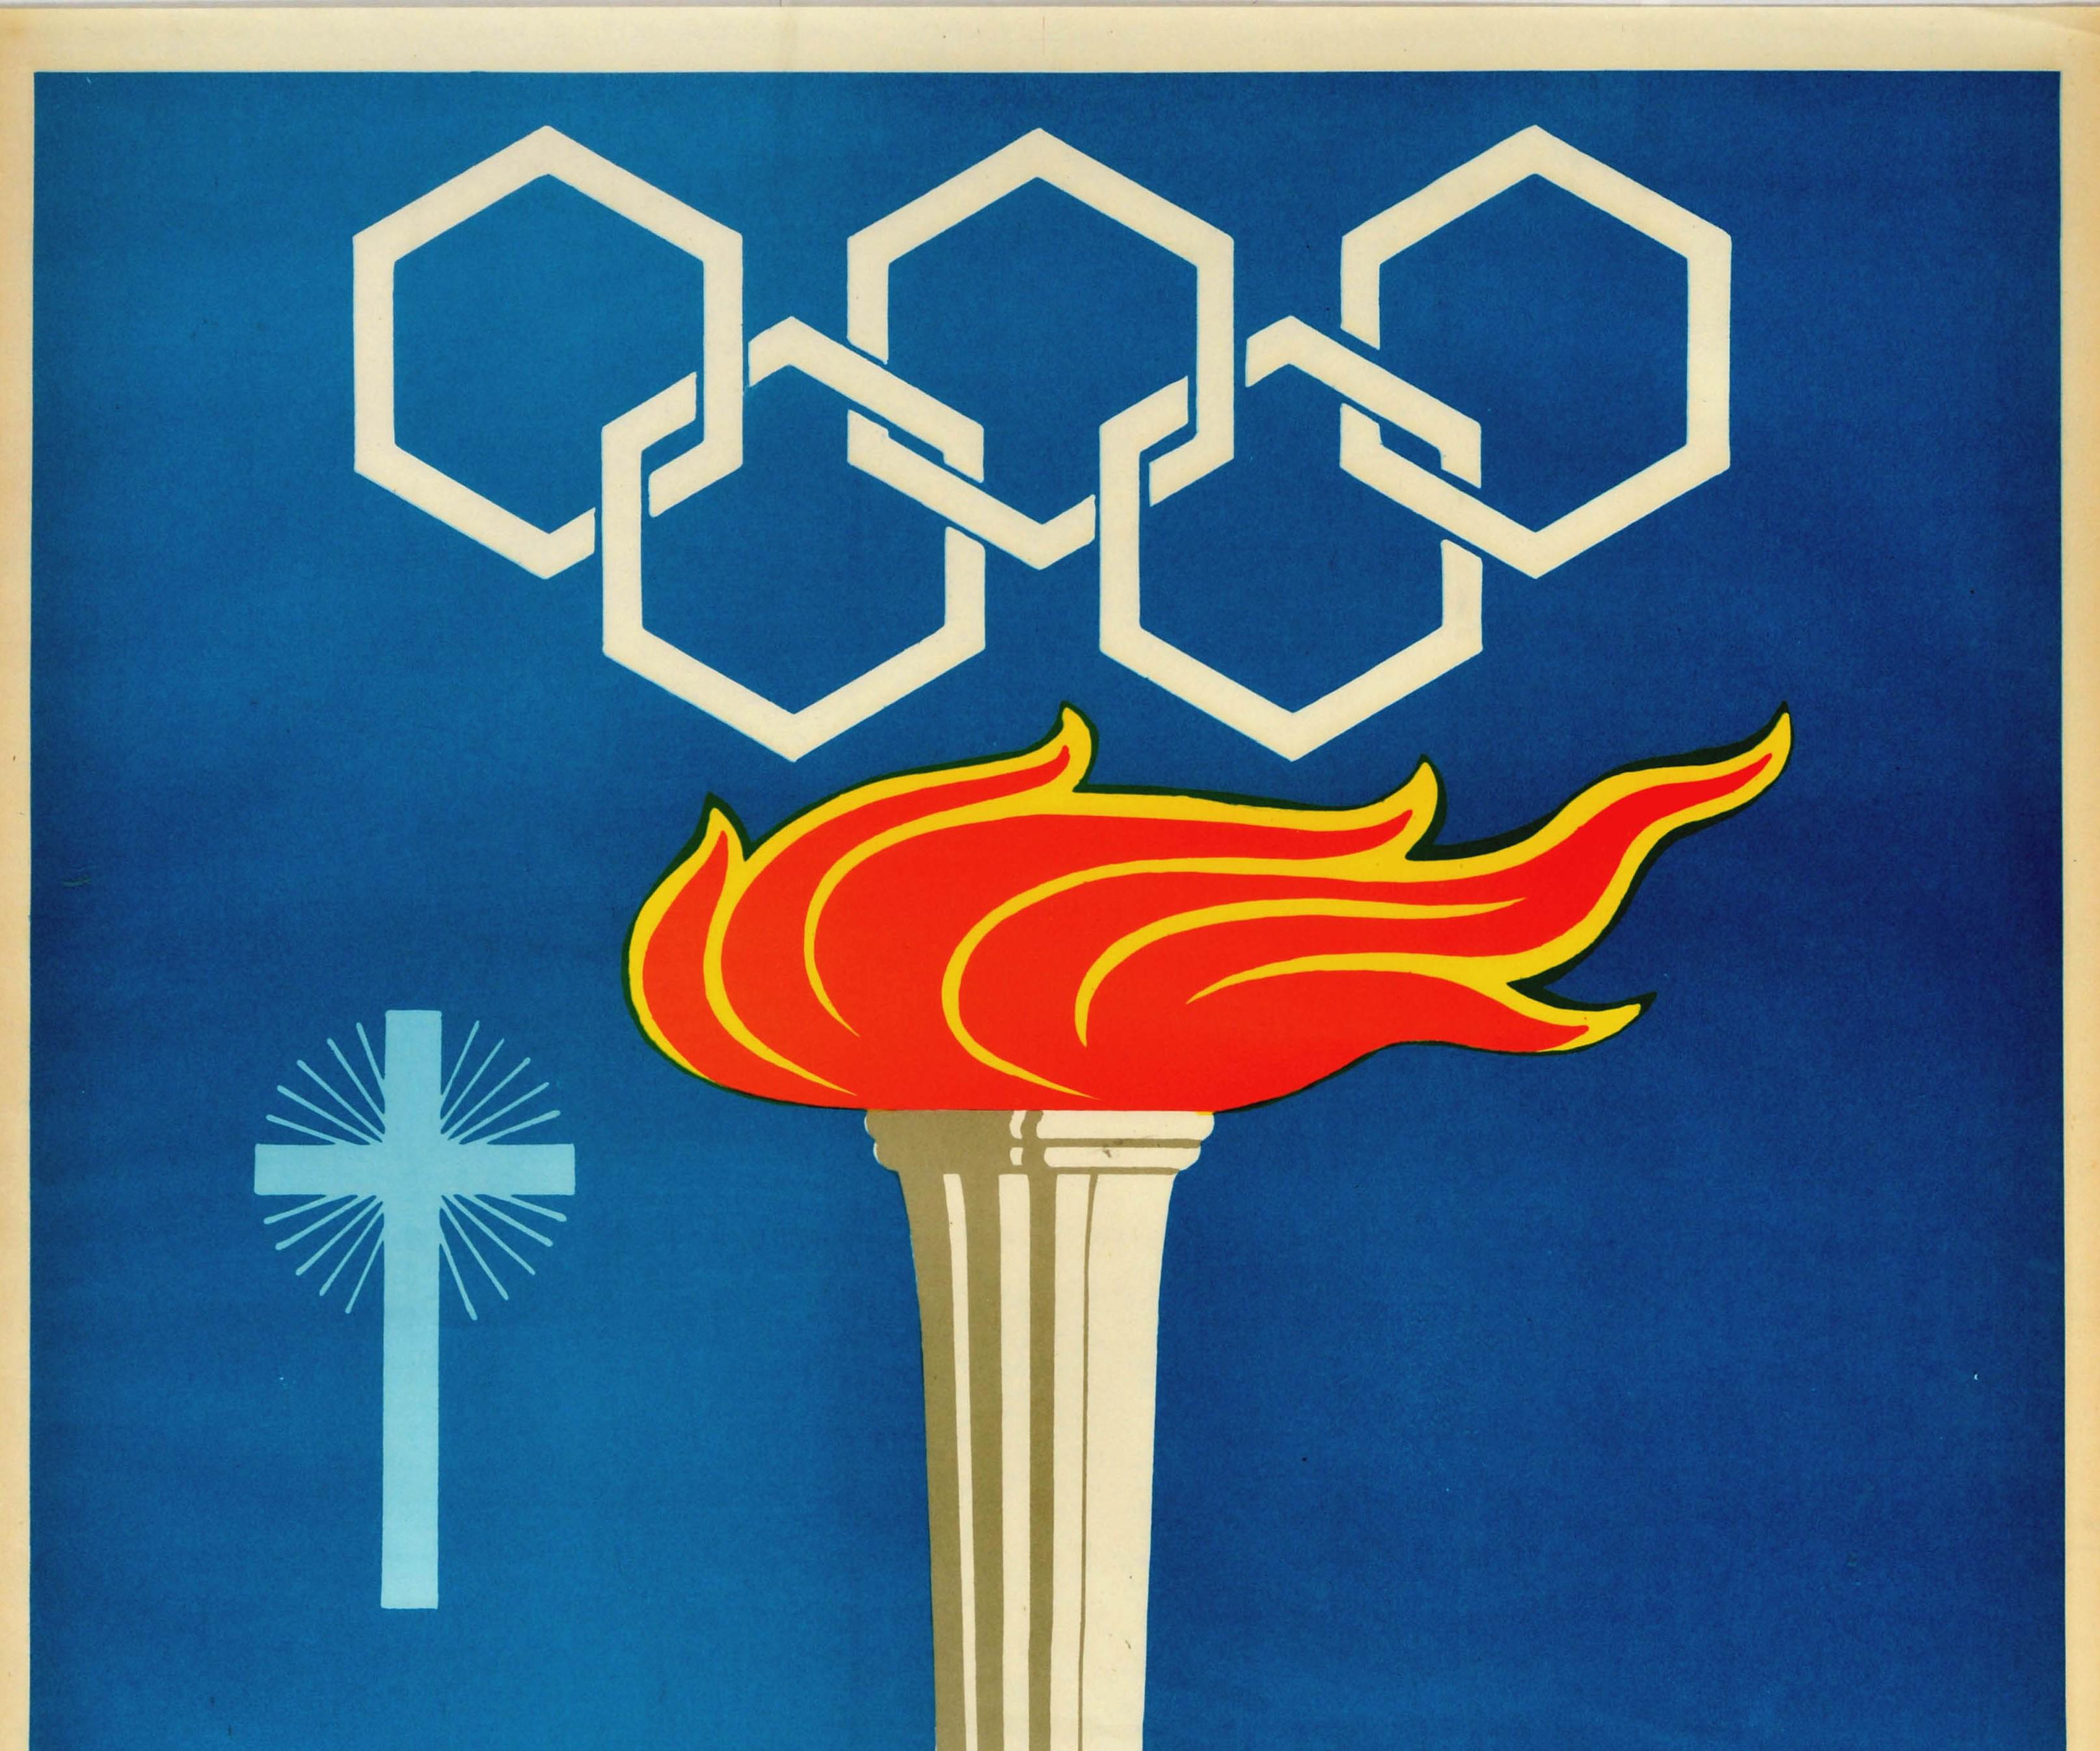 Original vintage sport poster - Il Centro Sportivo Italiano Agli Atleti Di Tutto Il Mondo / The Italian Sports Centre To Athletes From All Over the World - featuring a flaming torch from the Rome 1960 Summer Olympic Games with a minimalist line